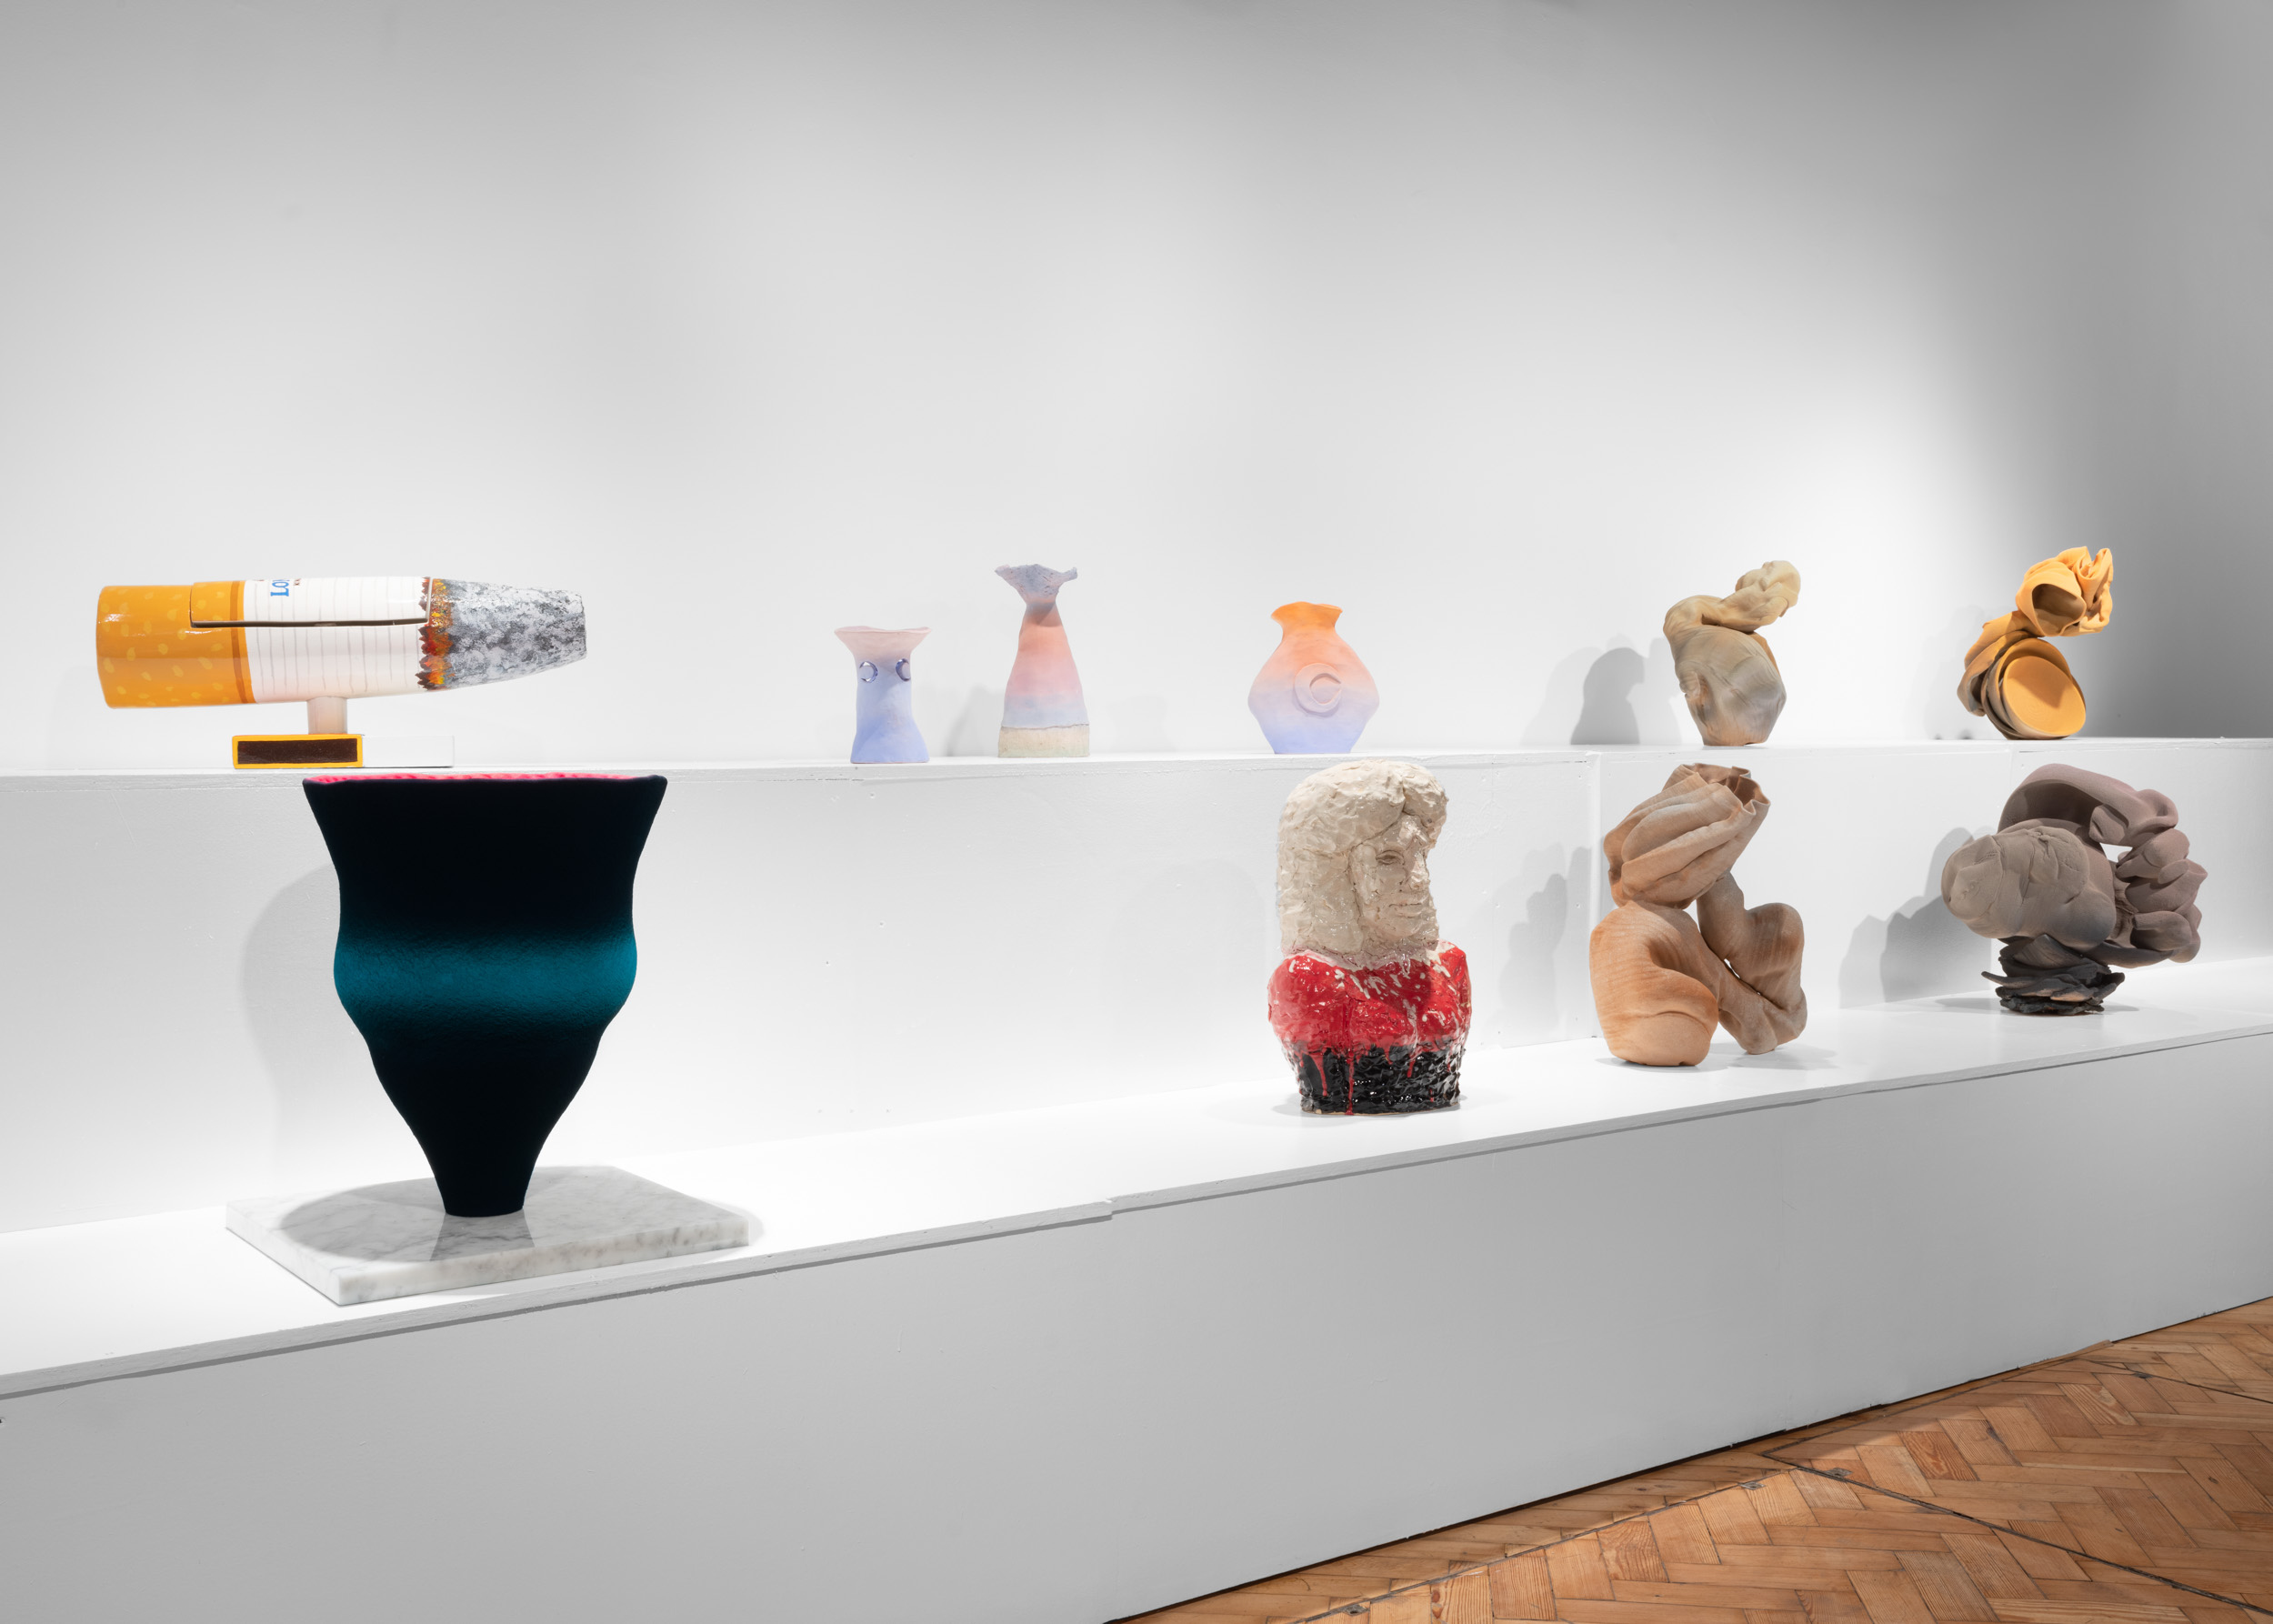 In The Round: Group Exhibition at Unit London, 2022